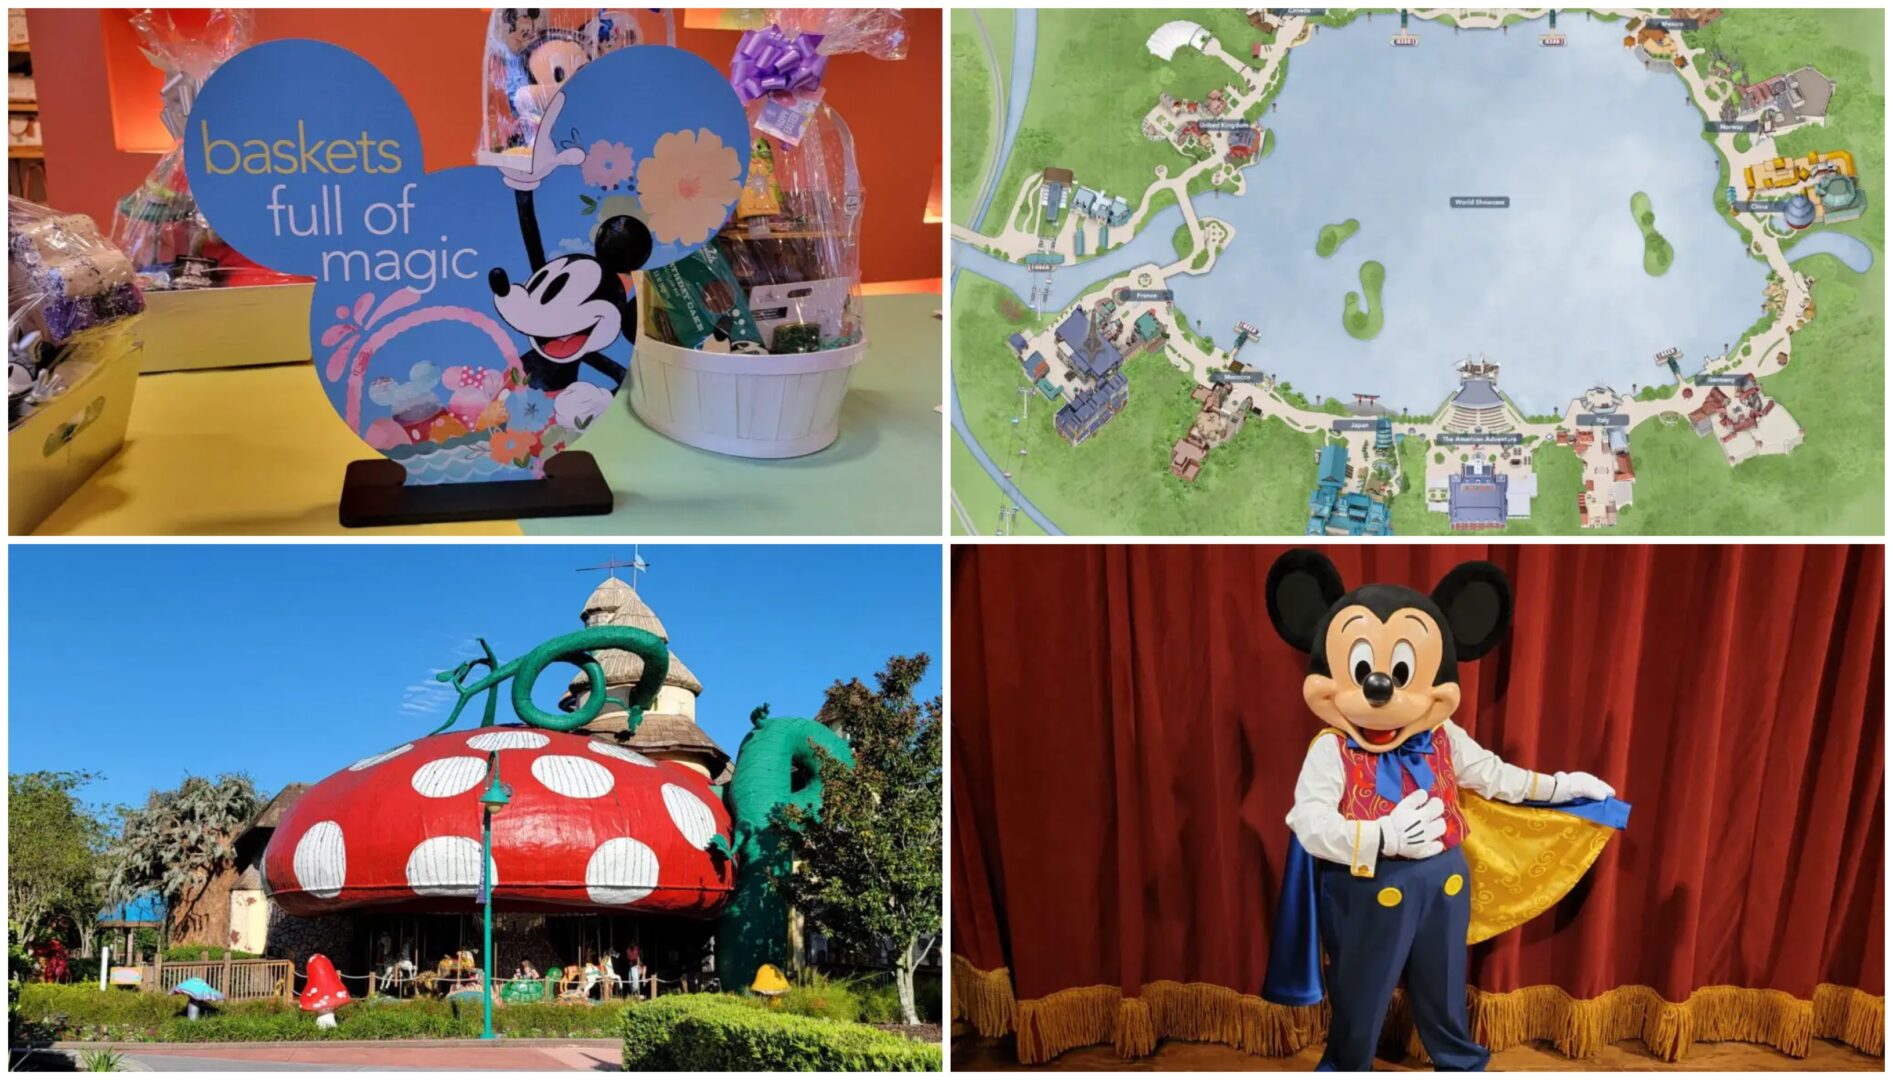 Disney News Highlights: Harmonious and Enchantment End, Magician Mickey Returns to Town Square, Pre-Made Baskets Available at Disney Resorts, Secret Invasion Trailer Released